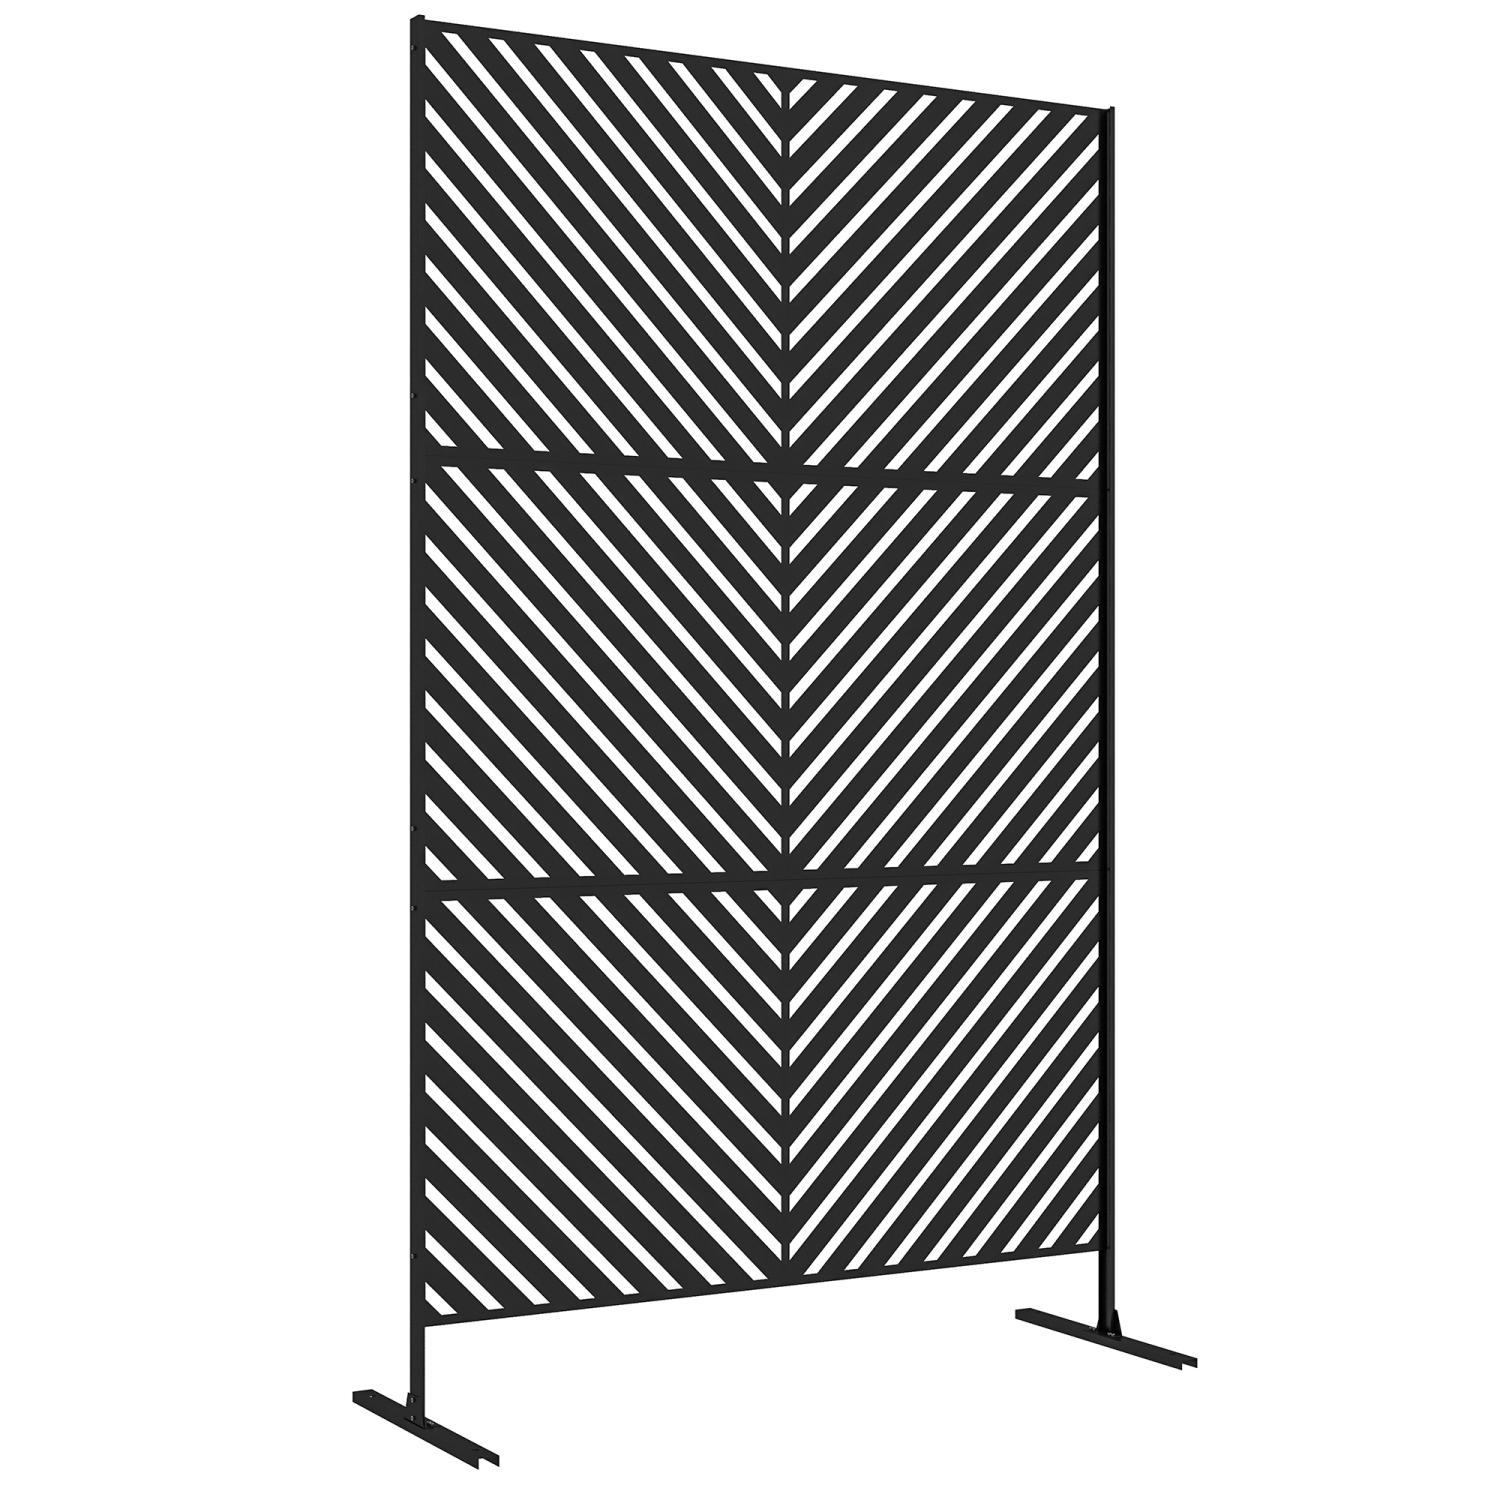 Outsunny Metal Outdoor Privacy Screen, Decorative Outdoor Divider with Stand and Expansion Screws, Freestanding Privacy Panel for Garden Backyard Deck Pool Hot Tub, Triangle Style